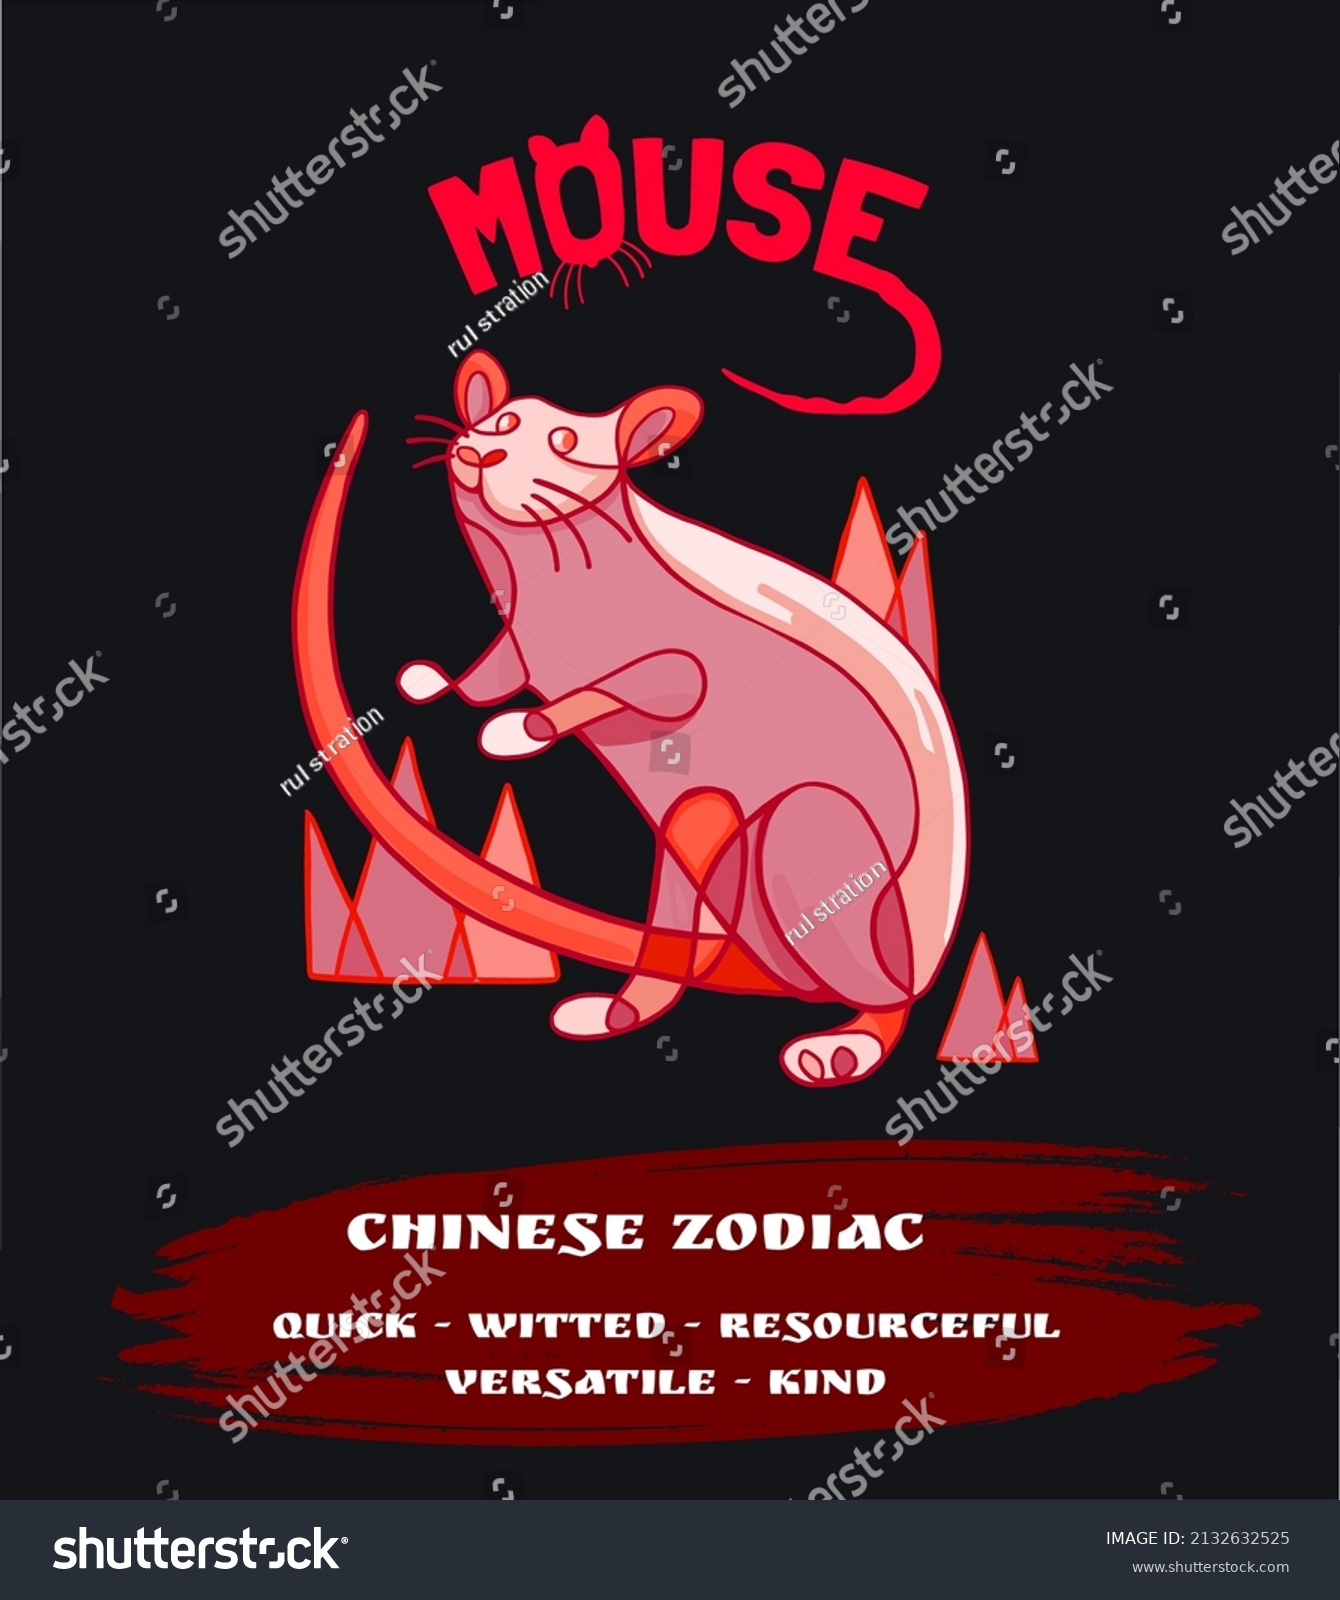 SVG of Chinese zodiac abstract red mouse is suitable for screen printing svg